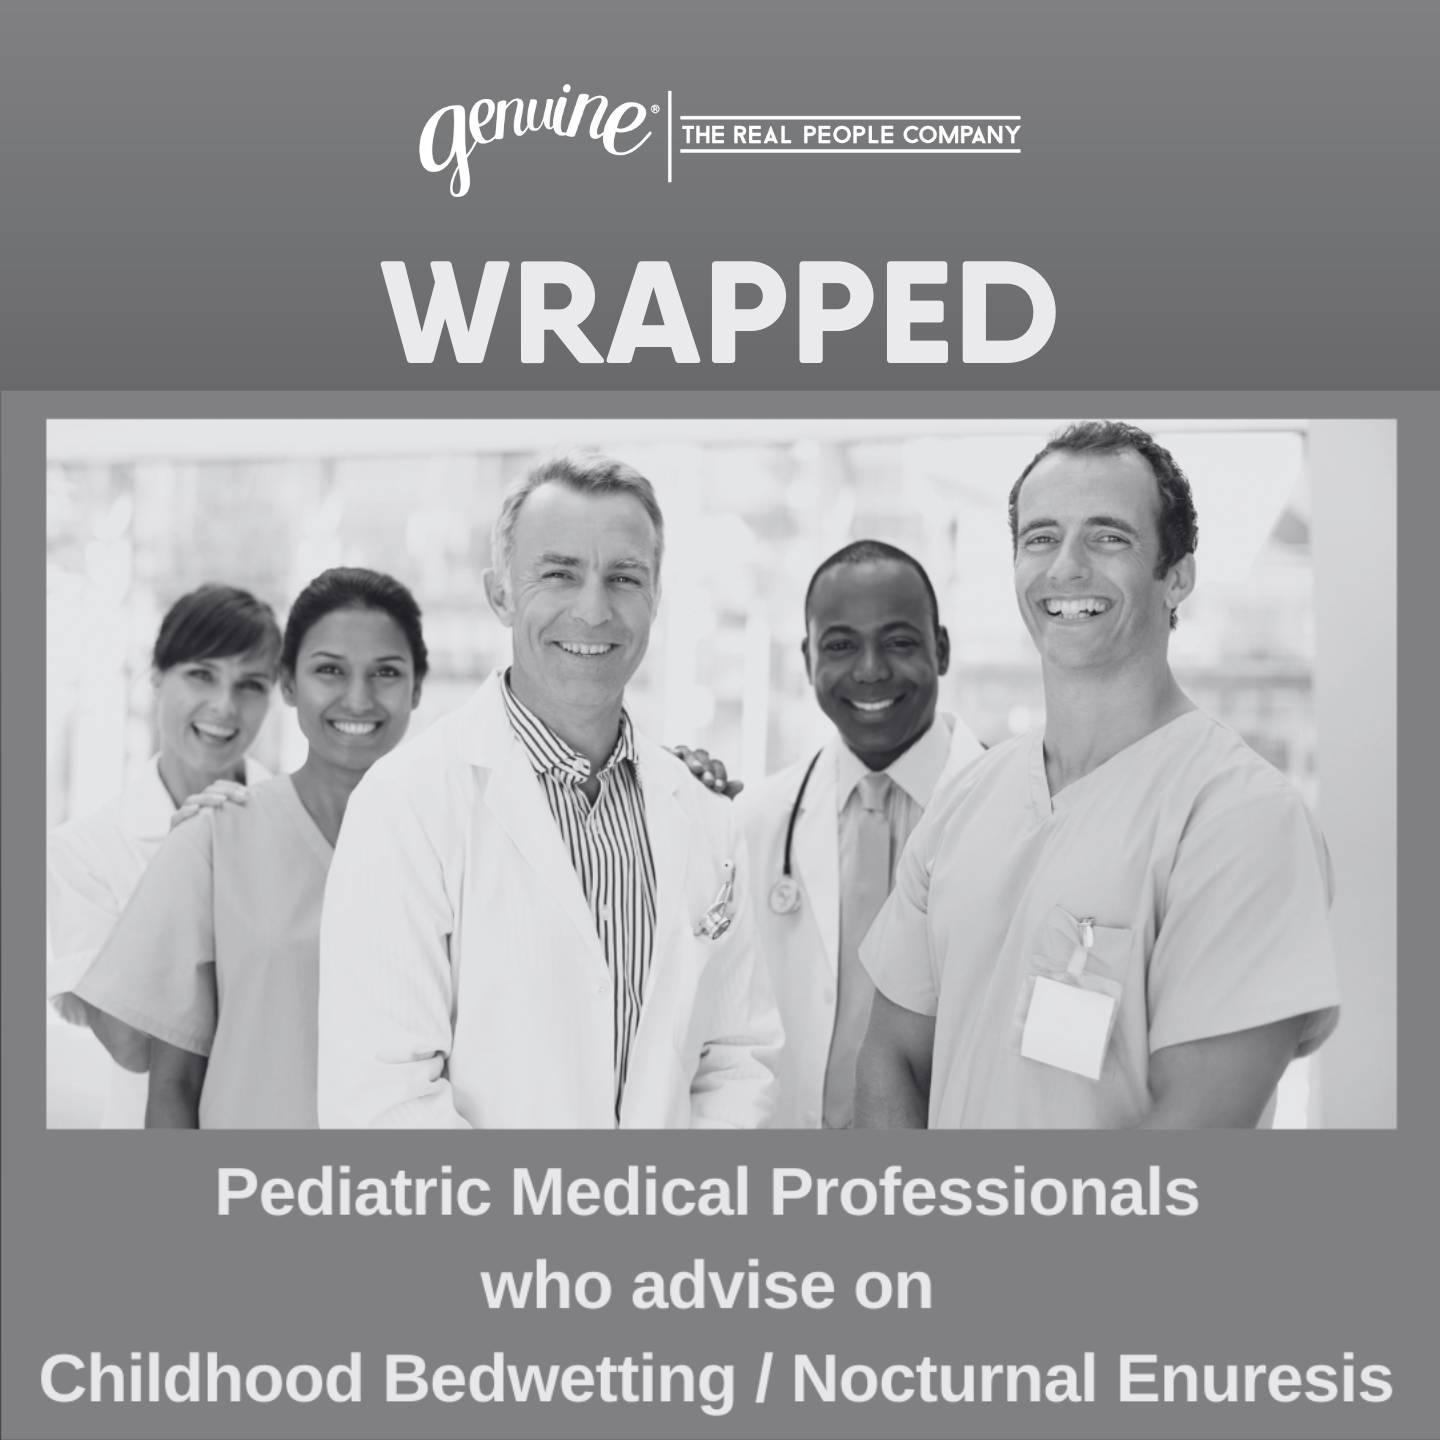 CASTING: PEDIATRIC MEDICAL PROFESSIONALS WHO ADVISE ON CHILDHOOD BEDWETTING / NOCTURNAL ENURESIS